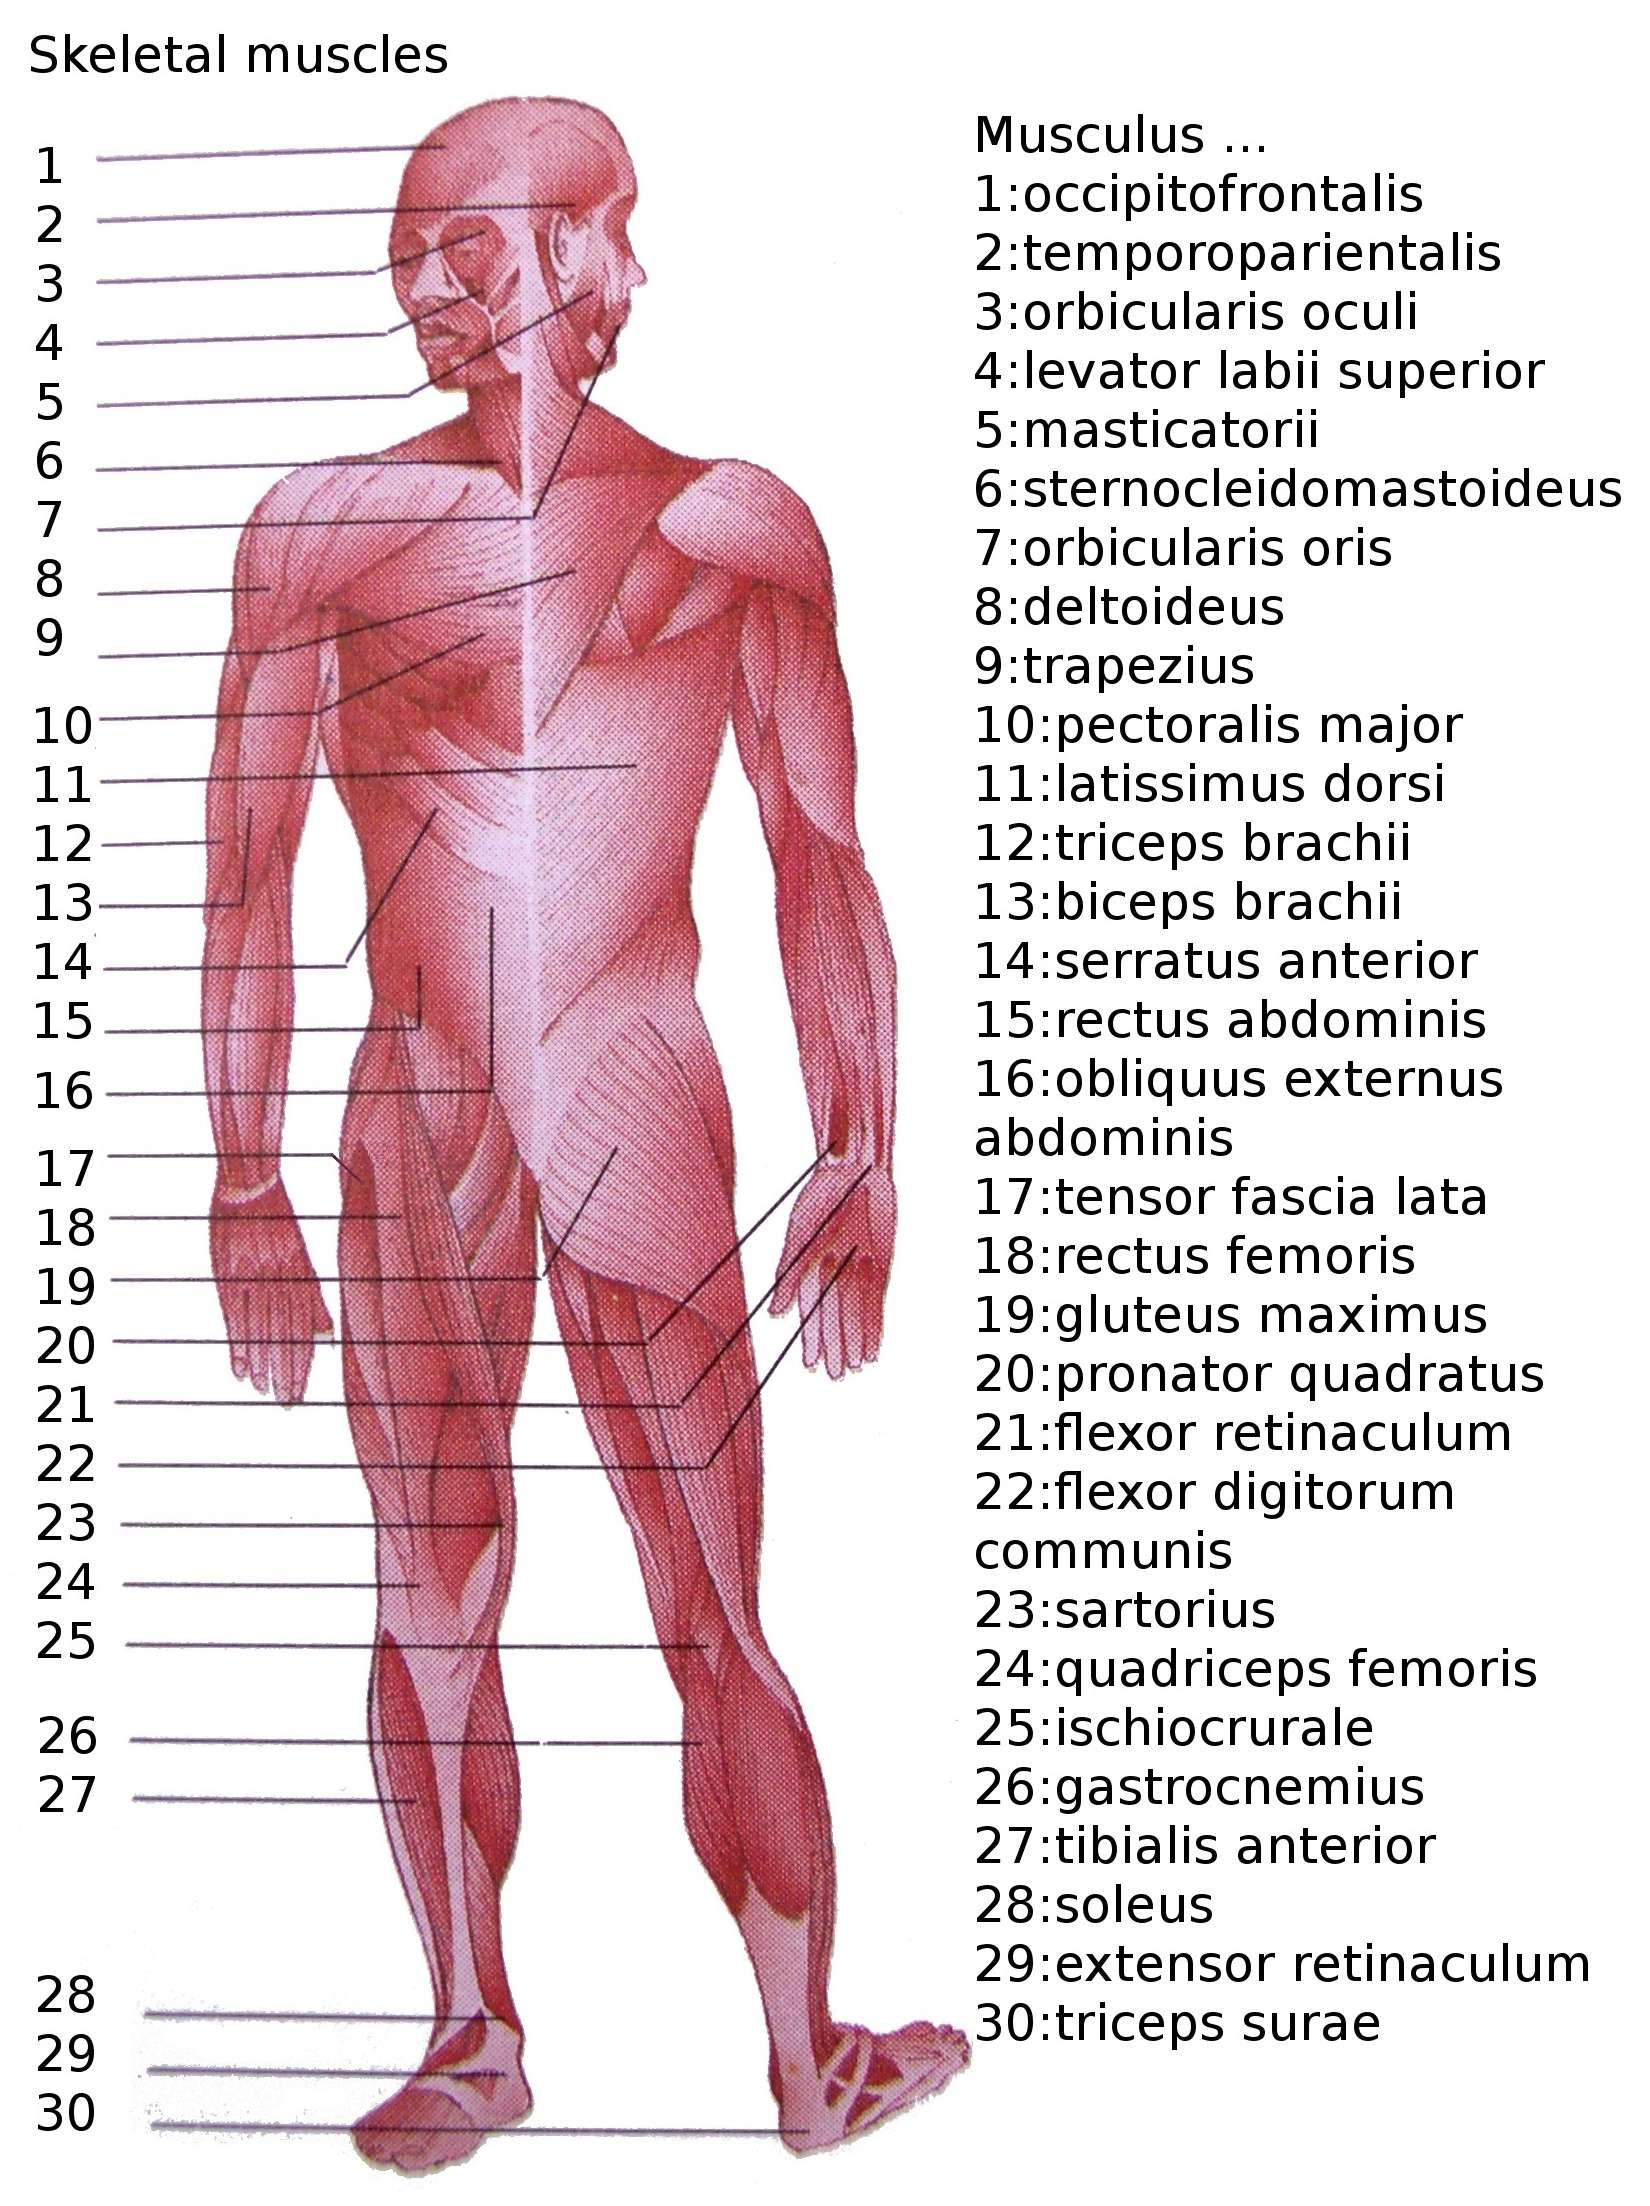 Human Muscle Diagram List Of Skeletal Muscles Of The Human Body Wikipedia